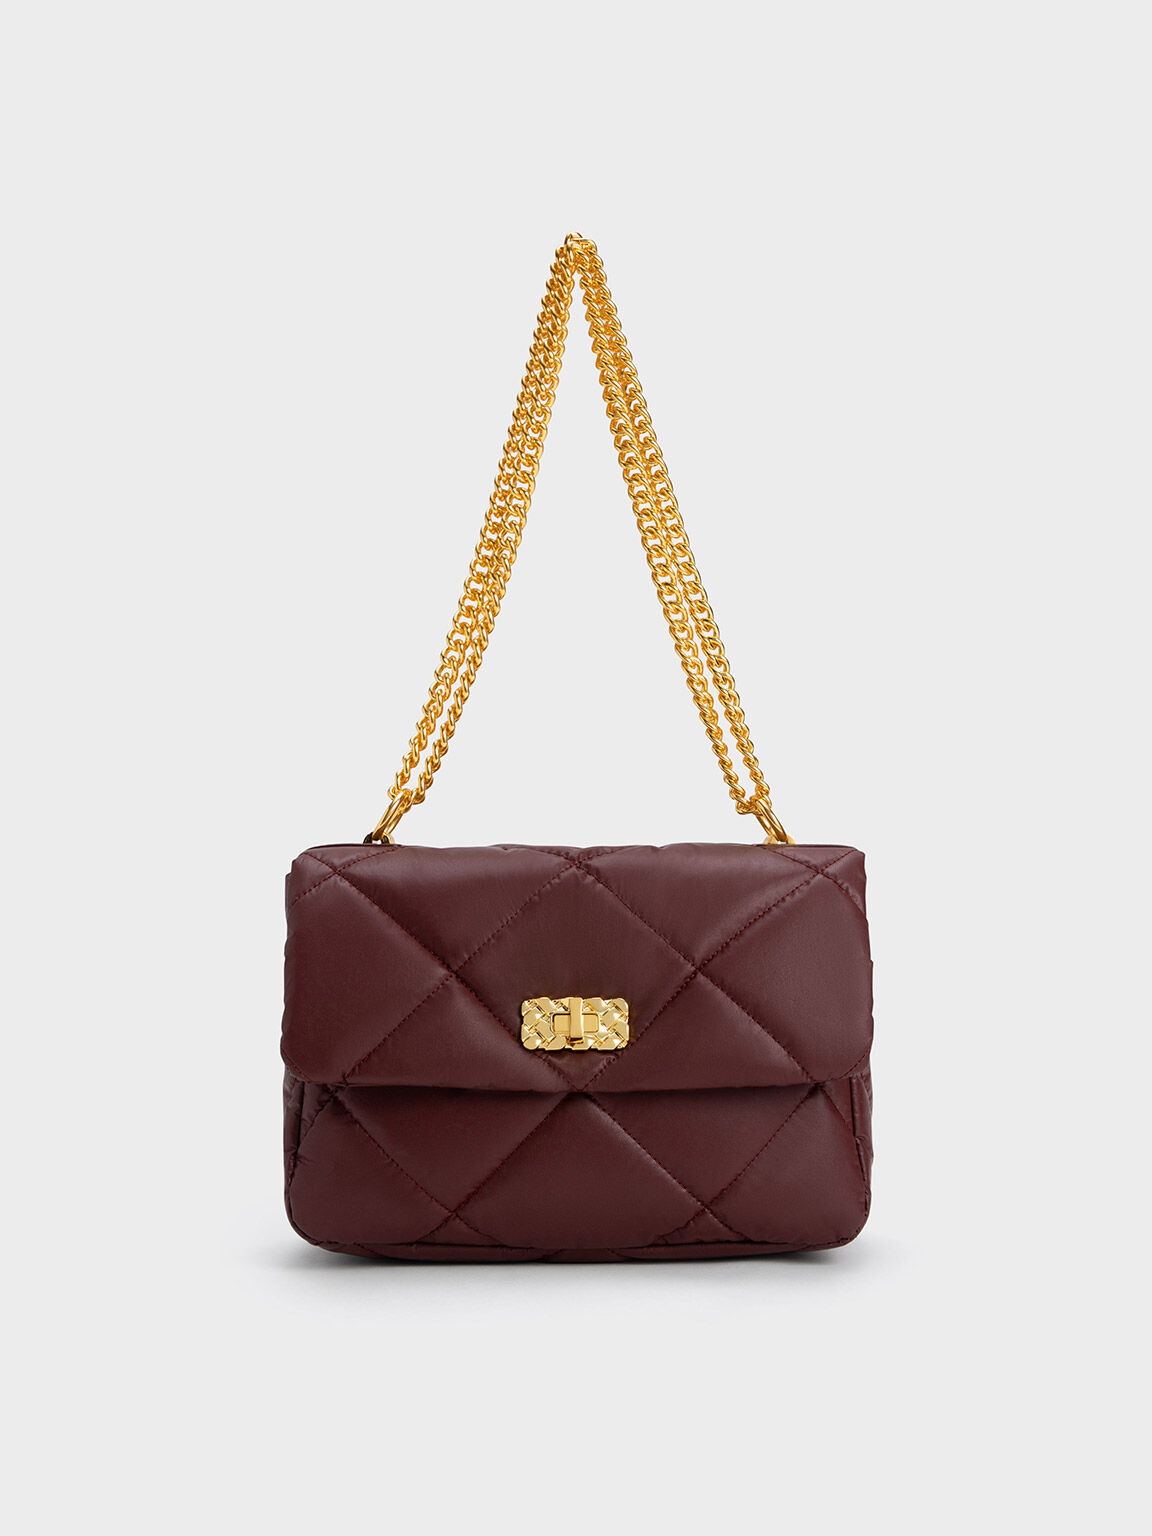 Chocolate Brown Leather Quilted Flap Bag